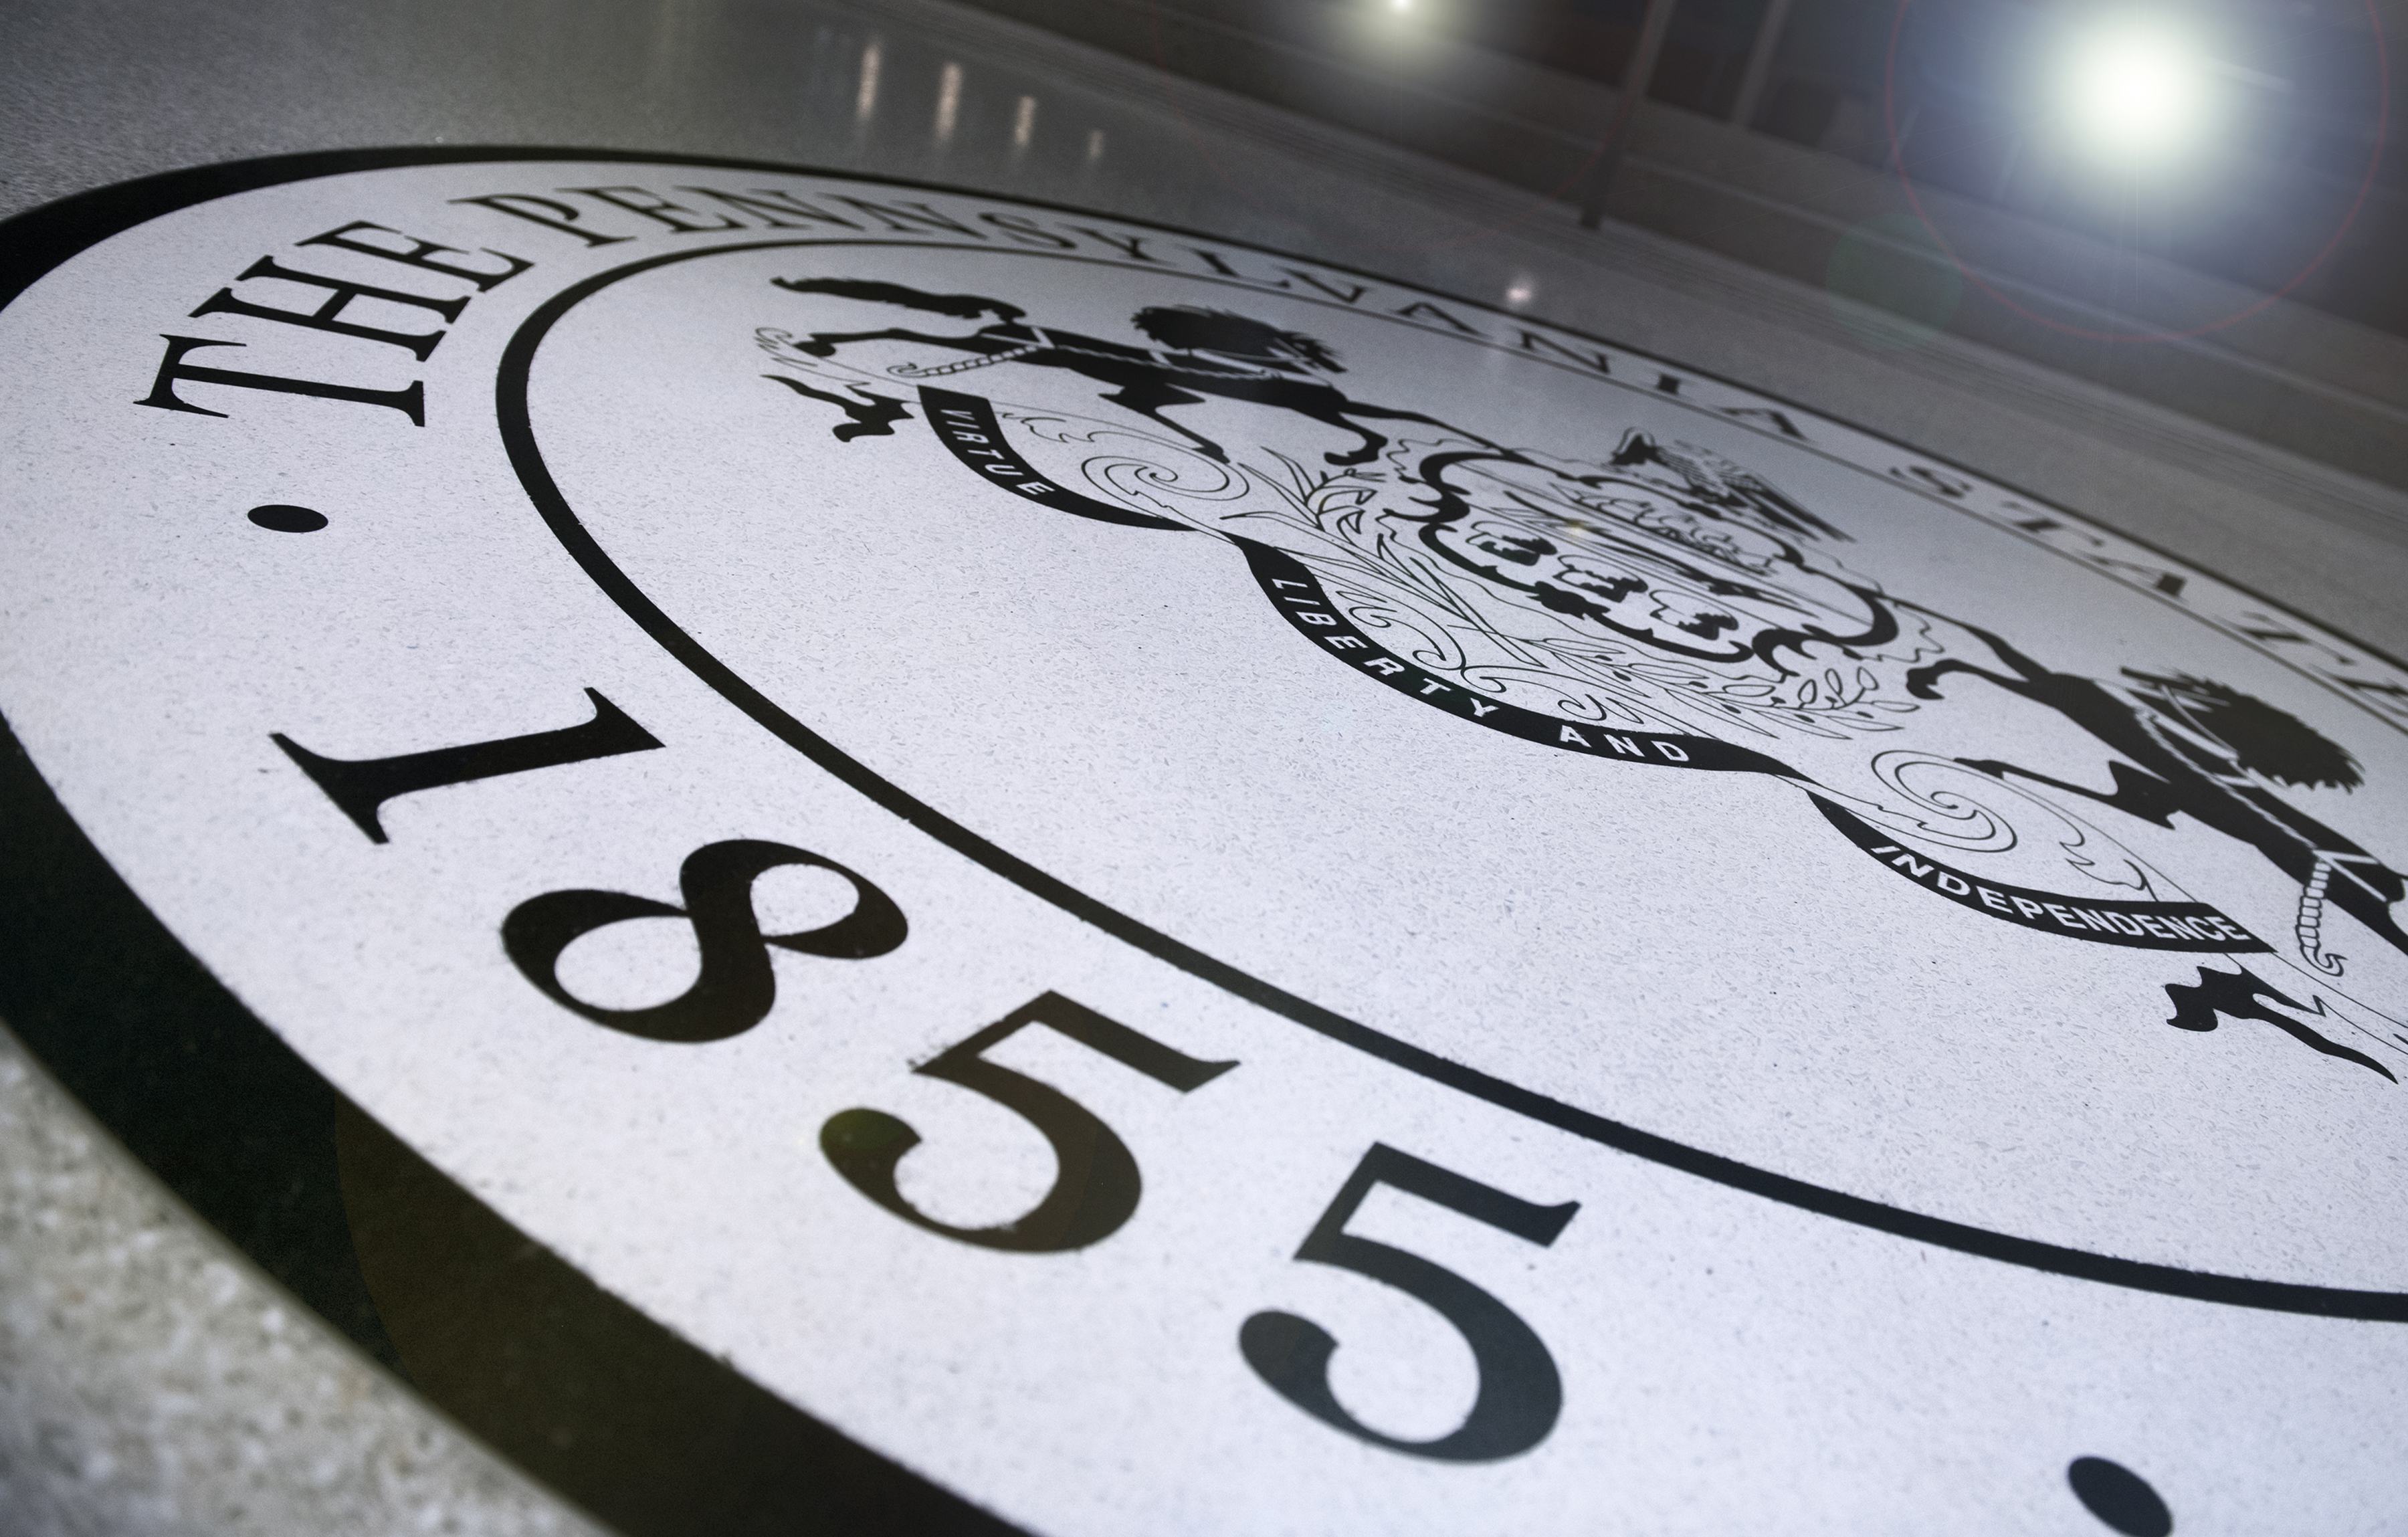 Current Work Arrangements For Faculty And Staff To Continue In Spring 2022 | Penn State University